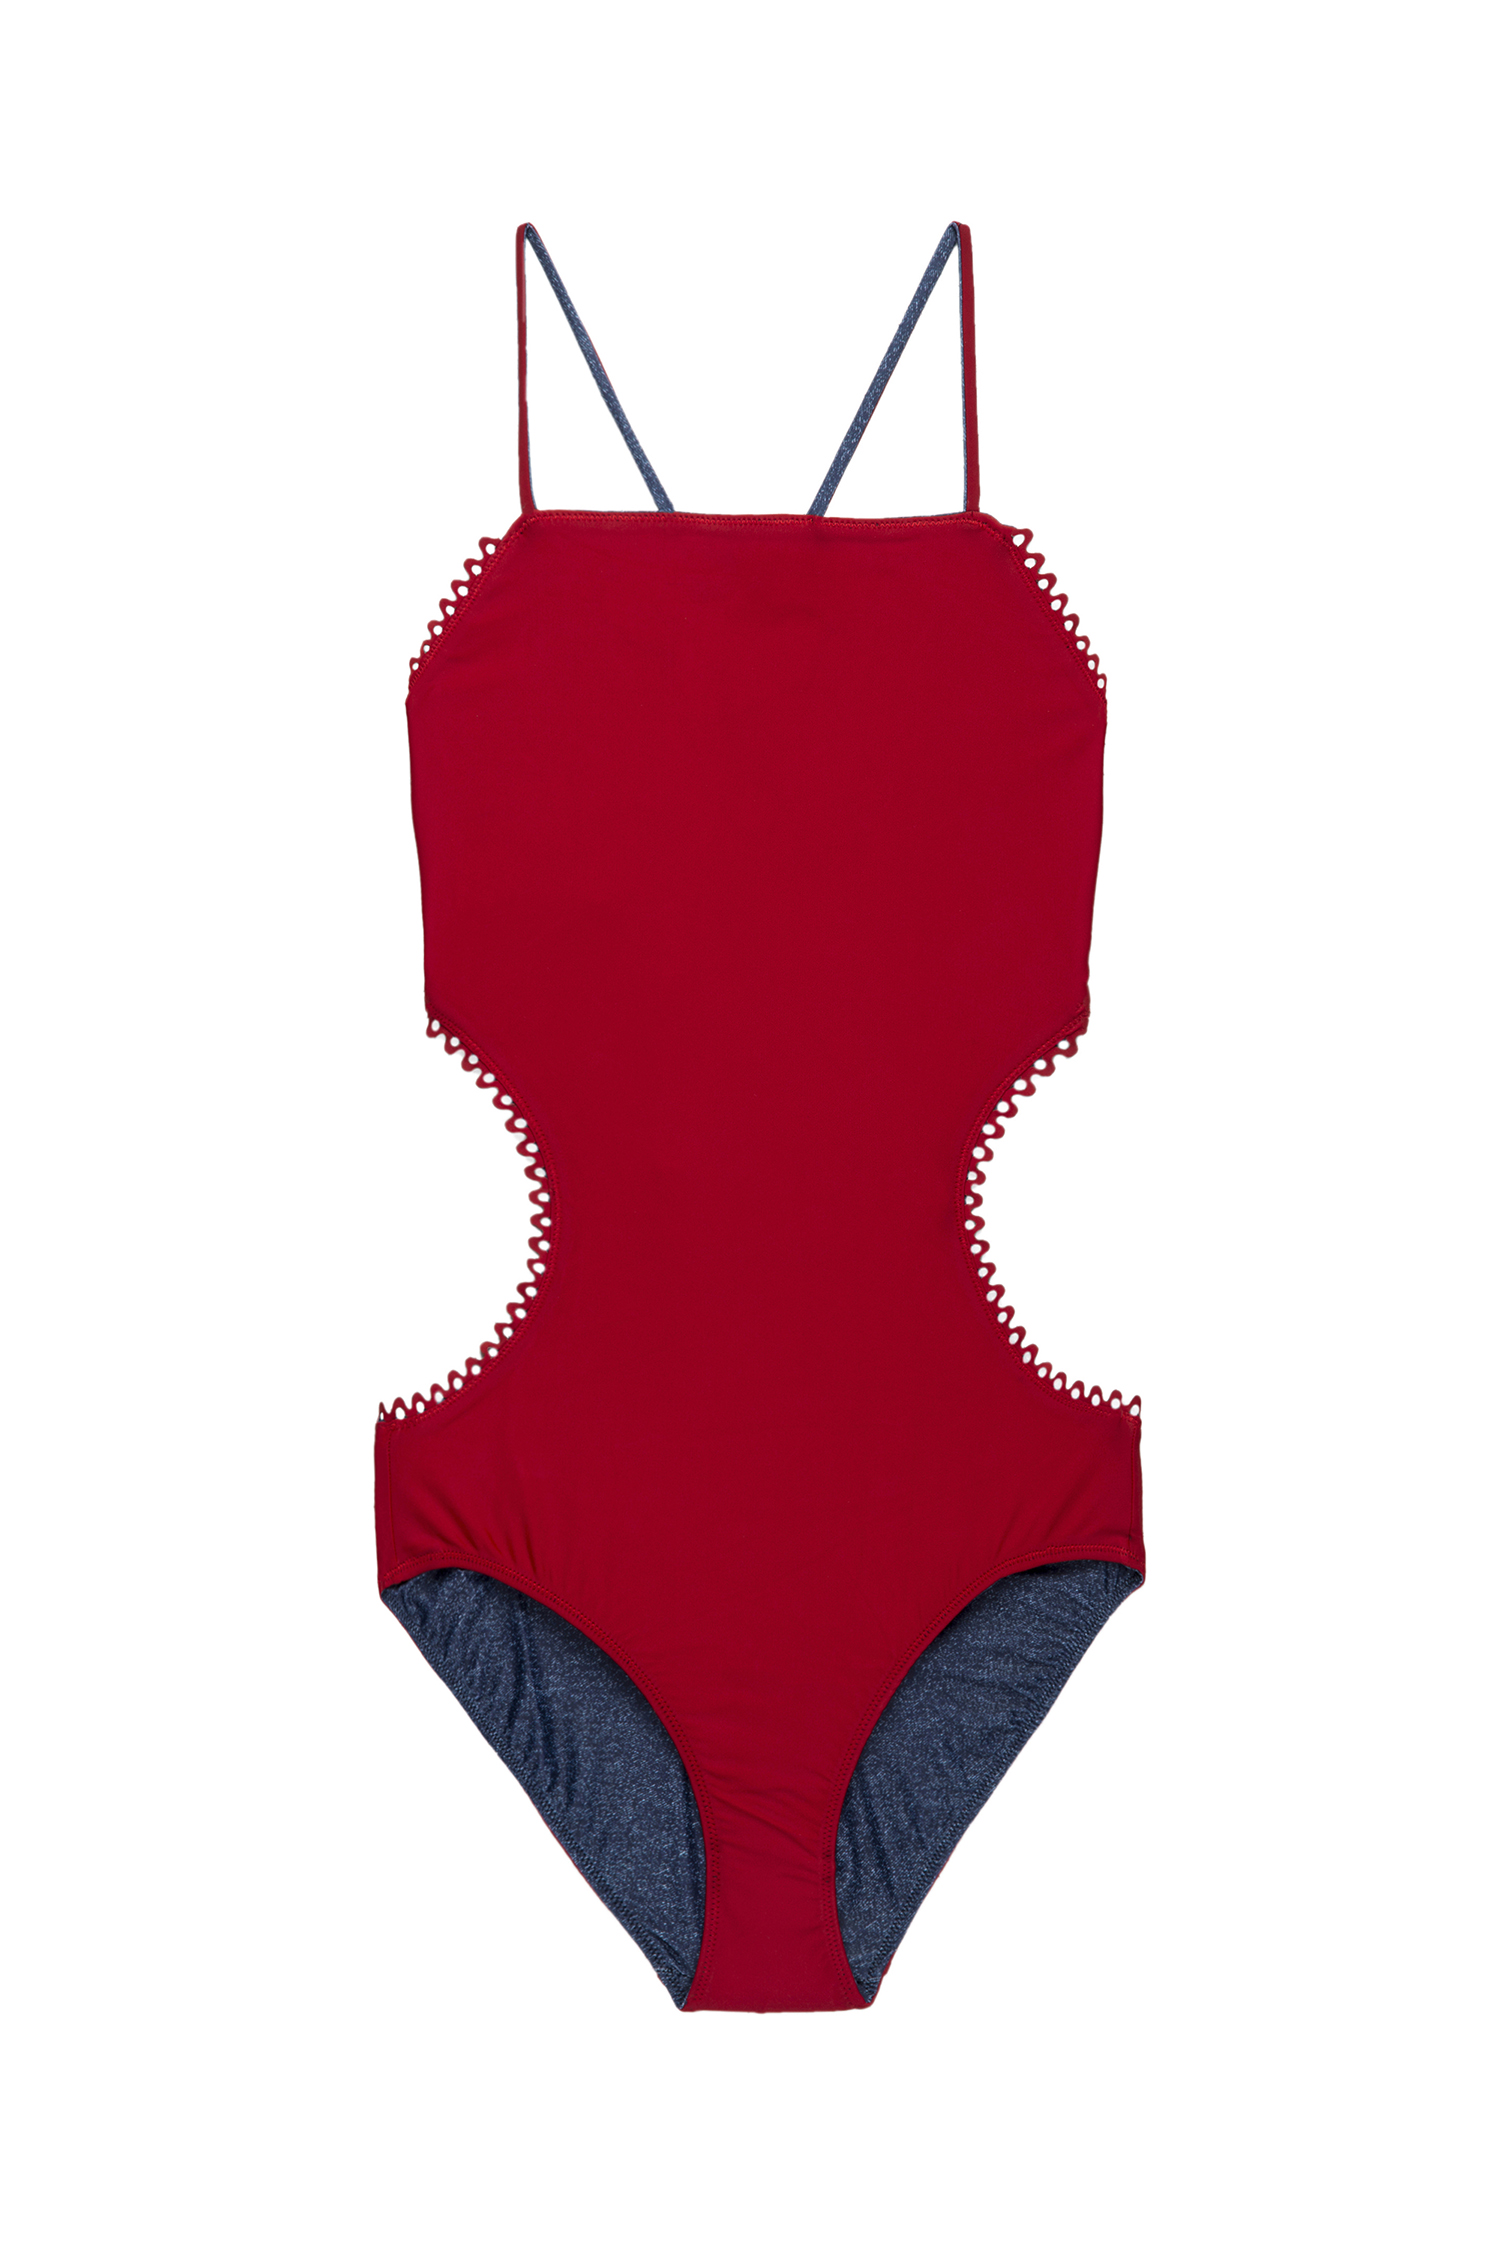 PHOTO: Hollie Watman's red cut-out one piece is on sale now.